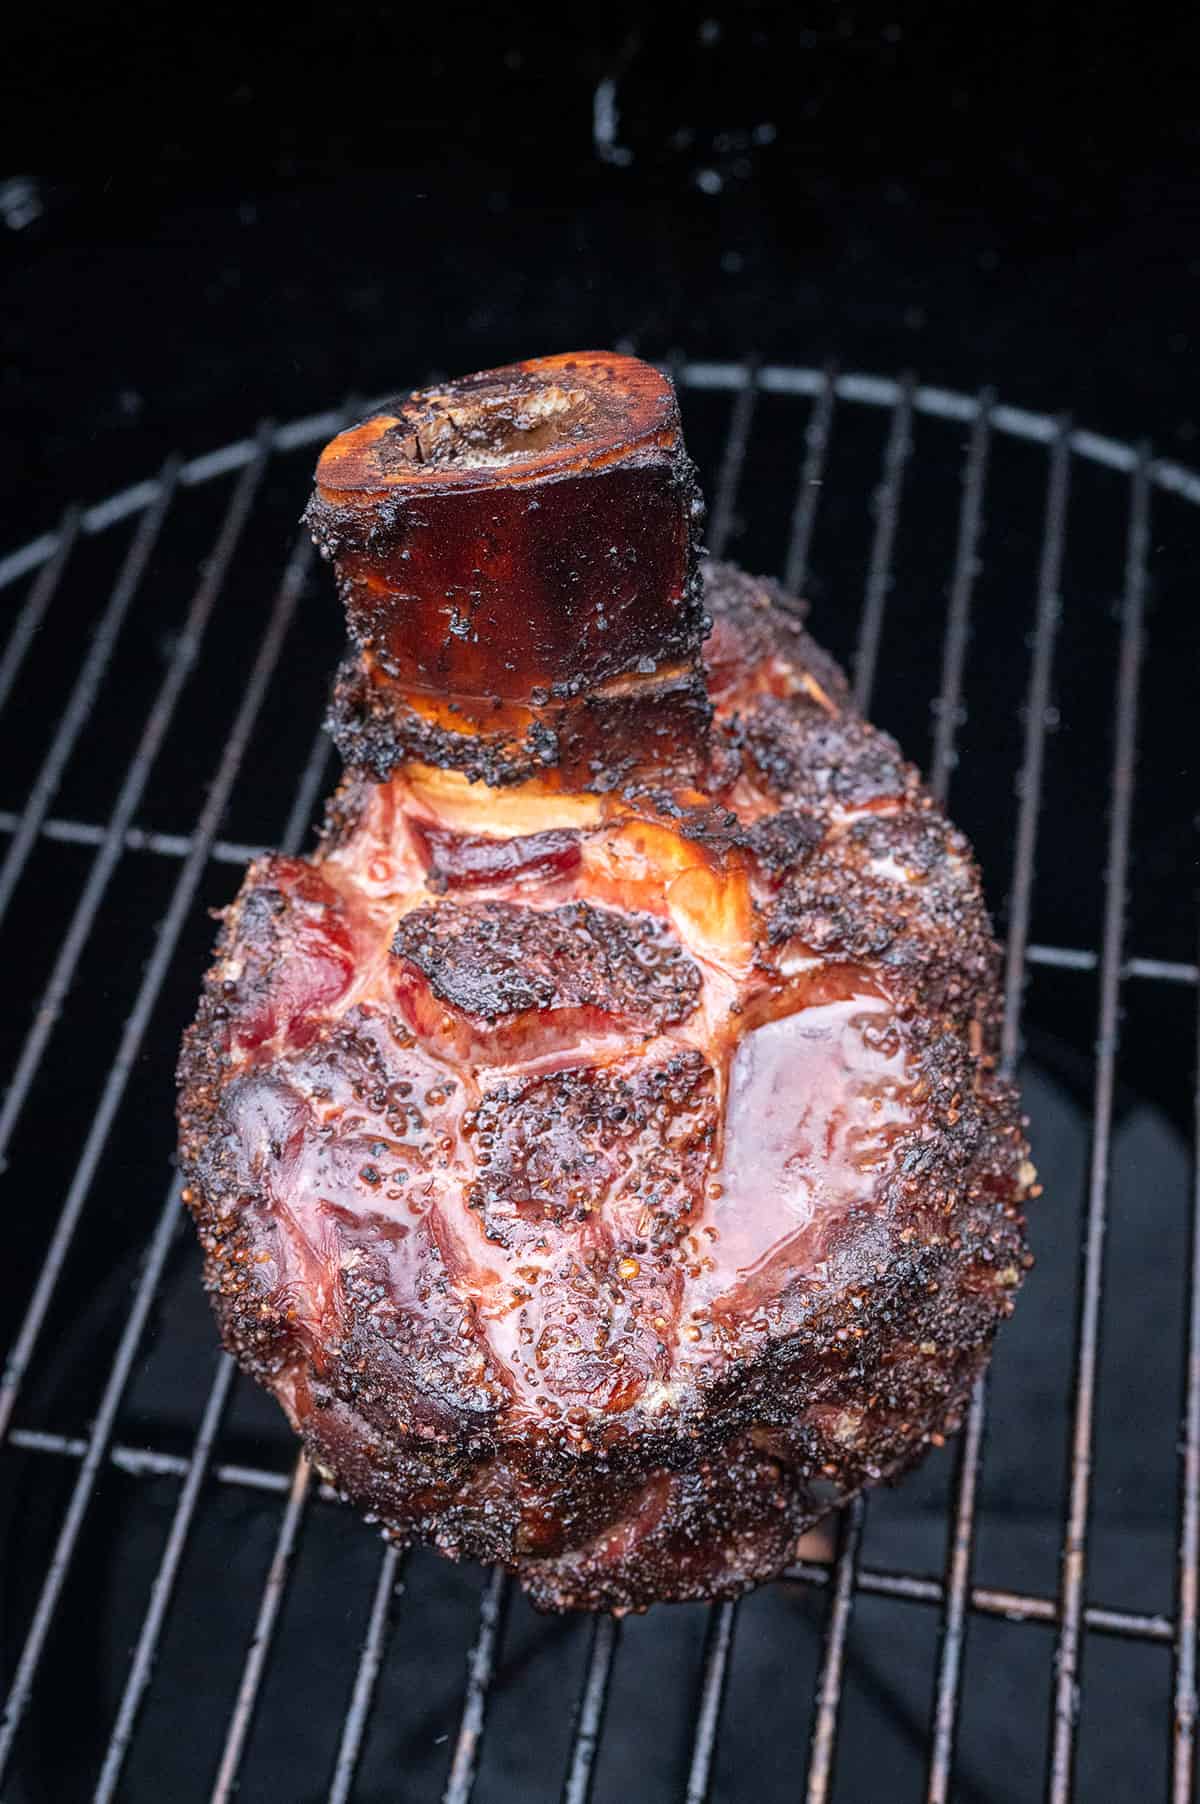 Beef shank smoking on grill.